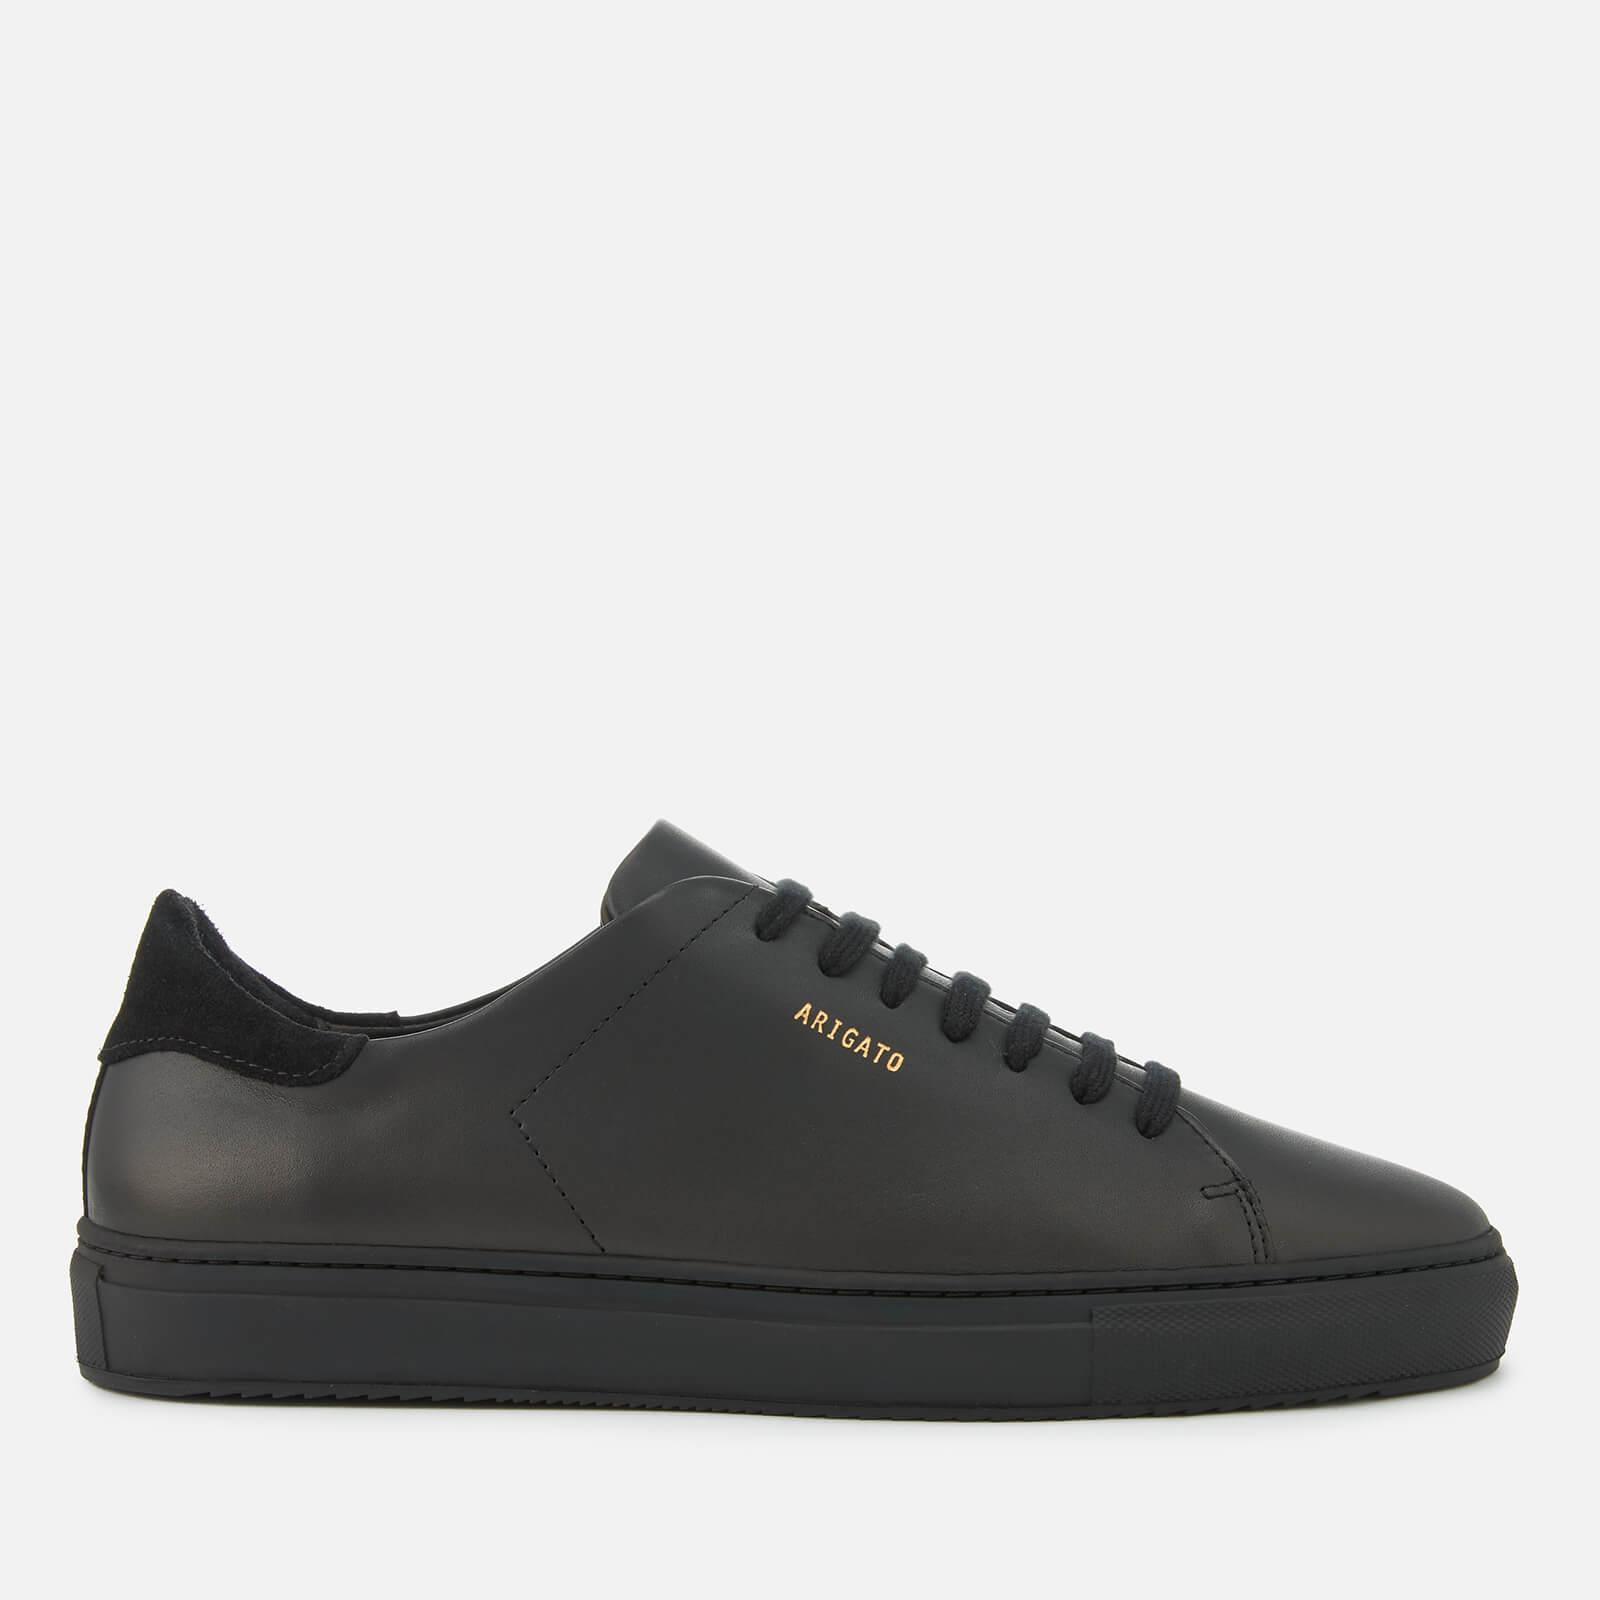 Axel Arigato Clean 90 Leather Cupsole Trainers in Black for Men - Lyst